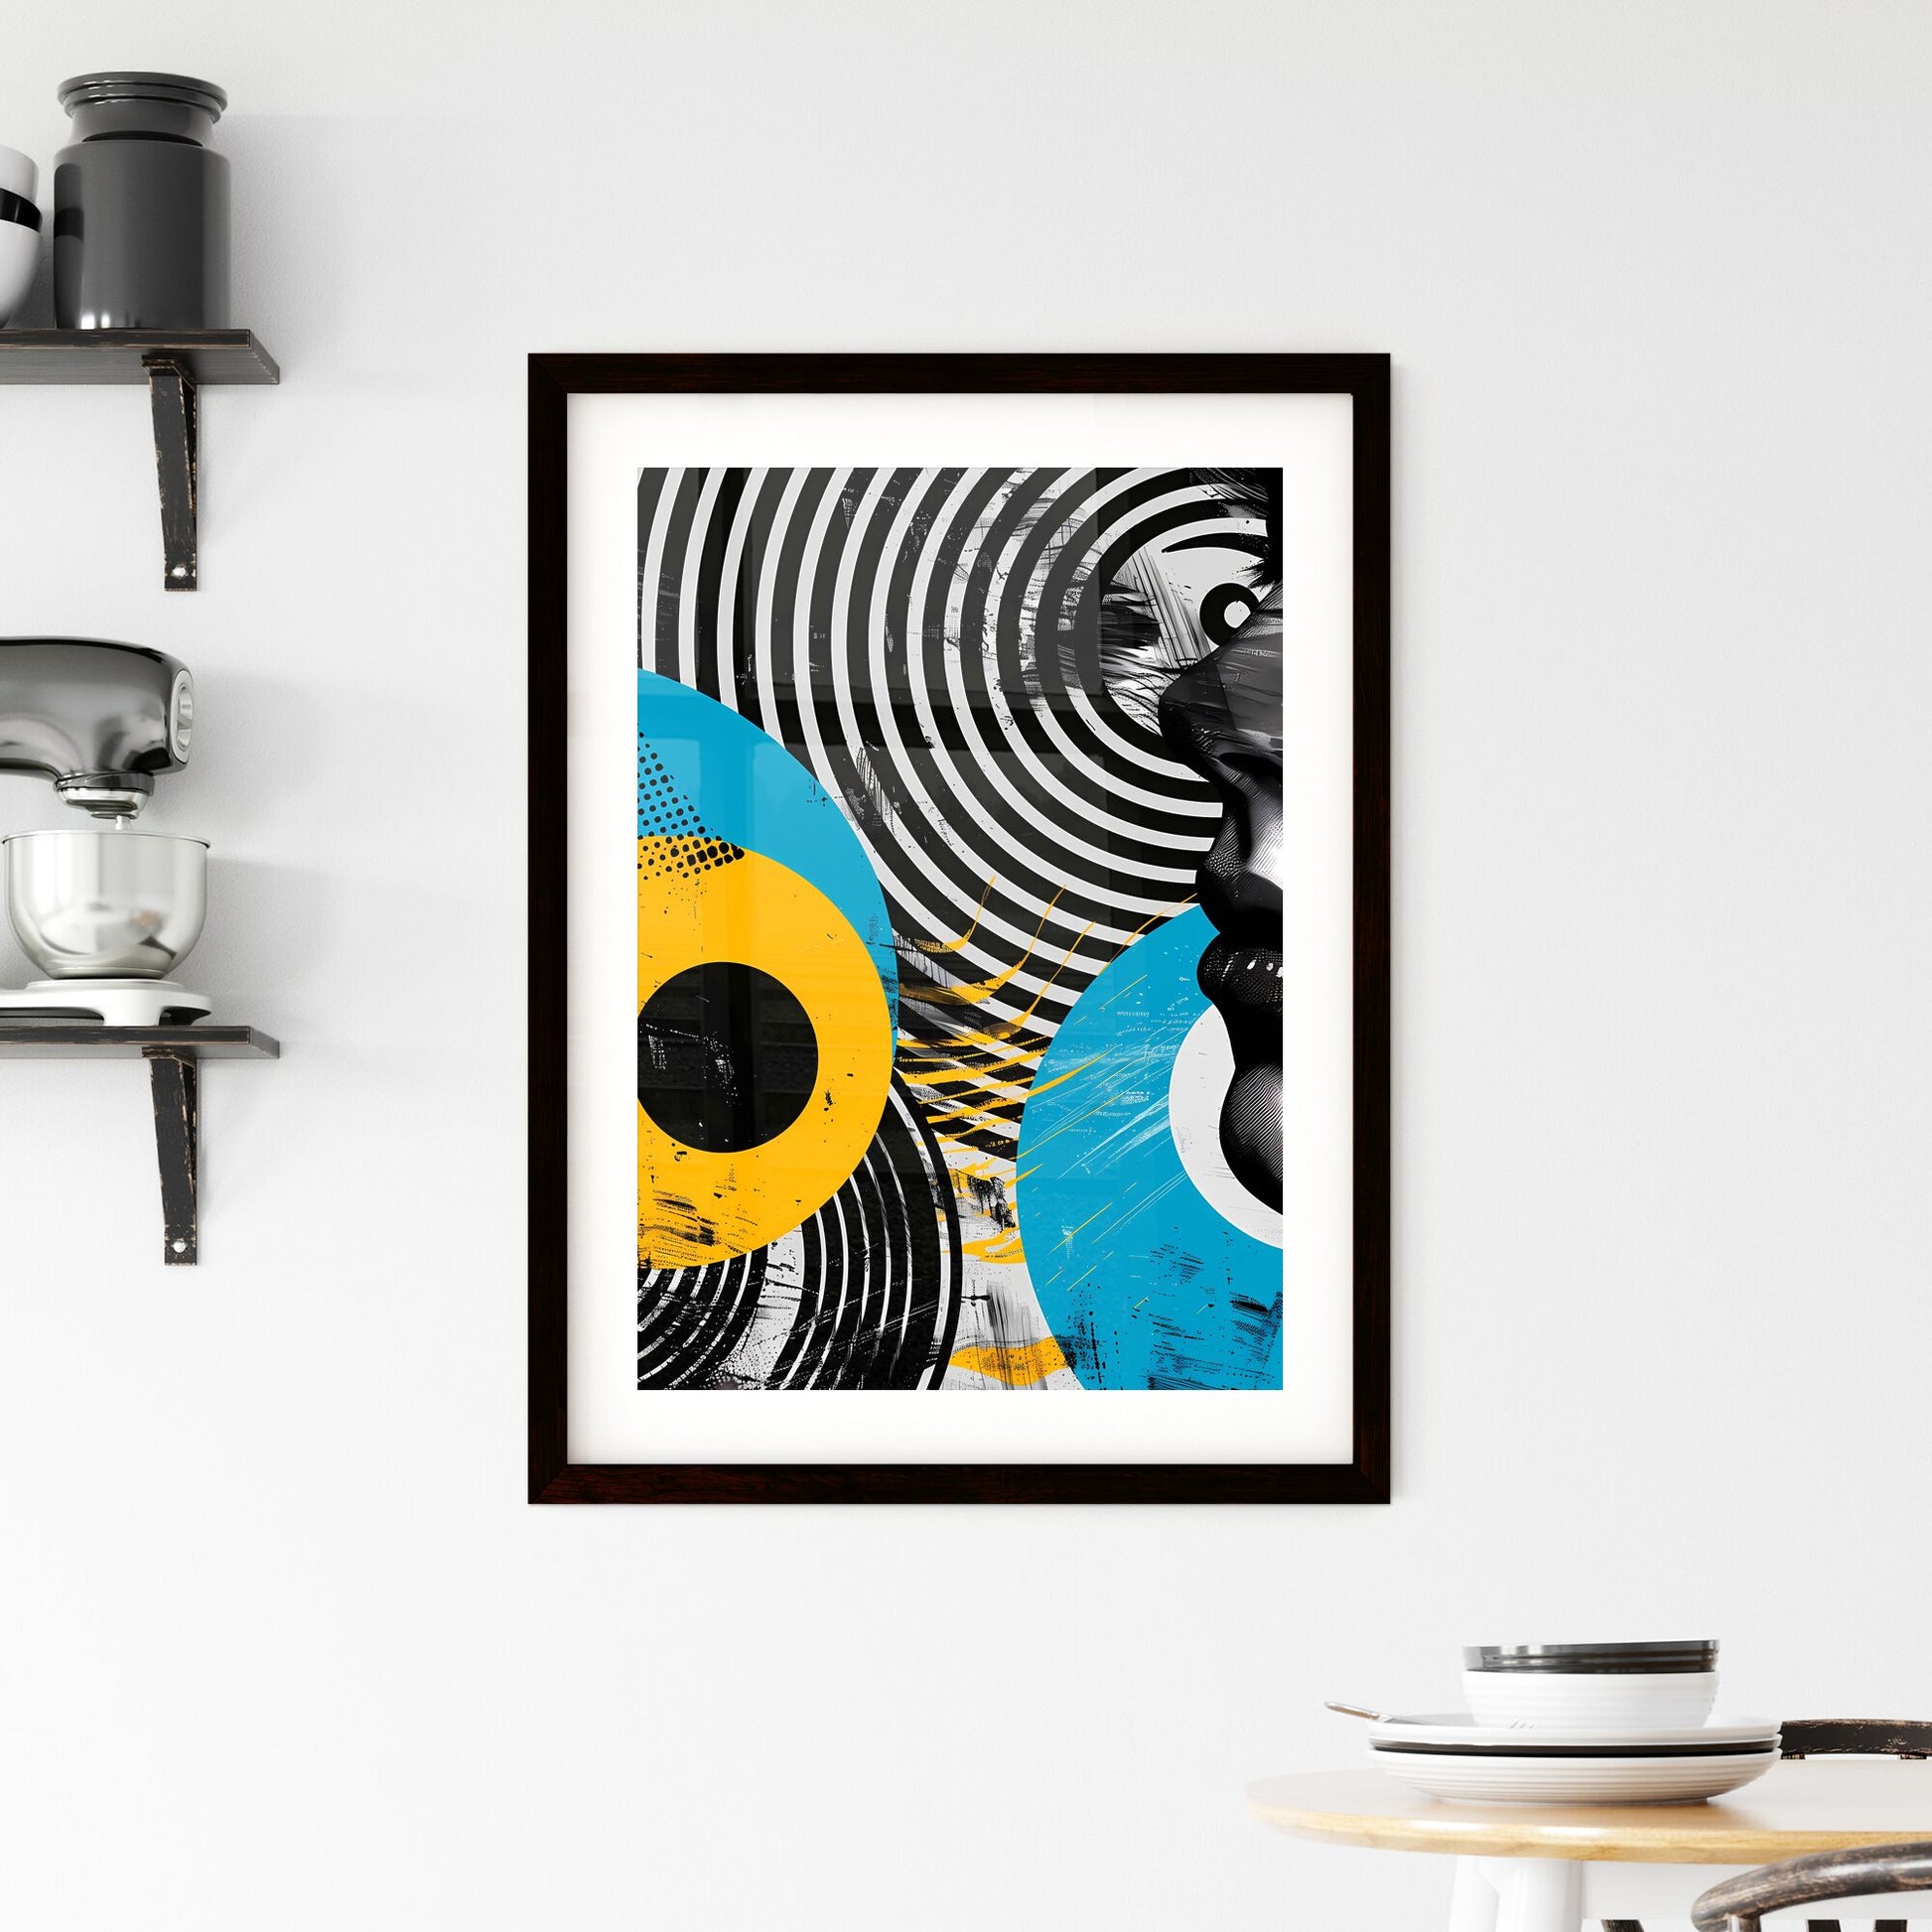 Sophisticated Corporate Graphic Design: Vibrant Geometric Painting with Magenta, Yellow, Cyan, Black, White Swirls and Circles, Emphasizing Unstoppable New Ideas Default Title